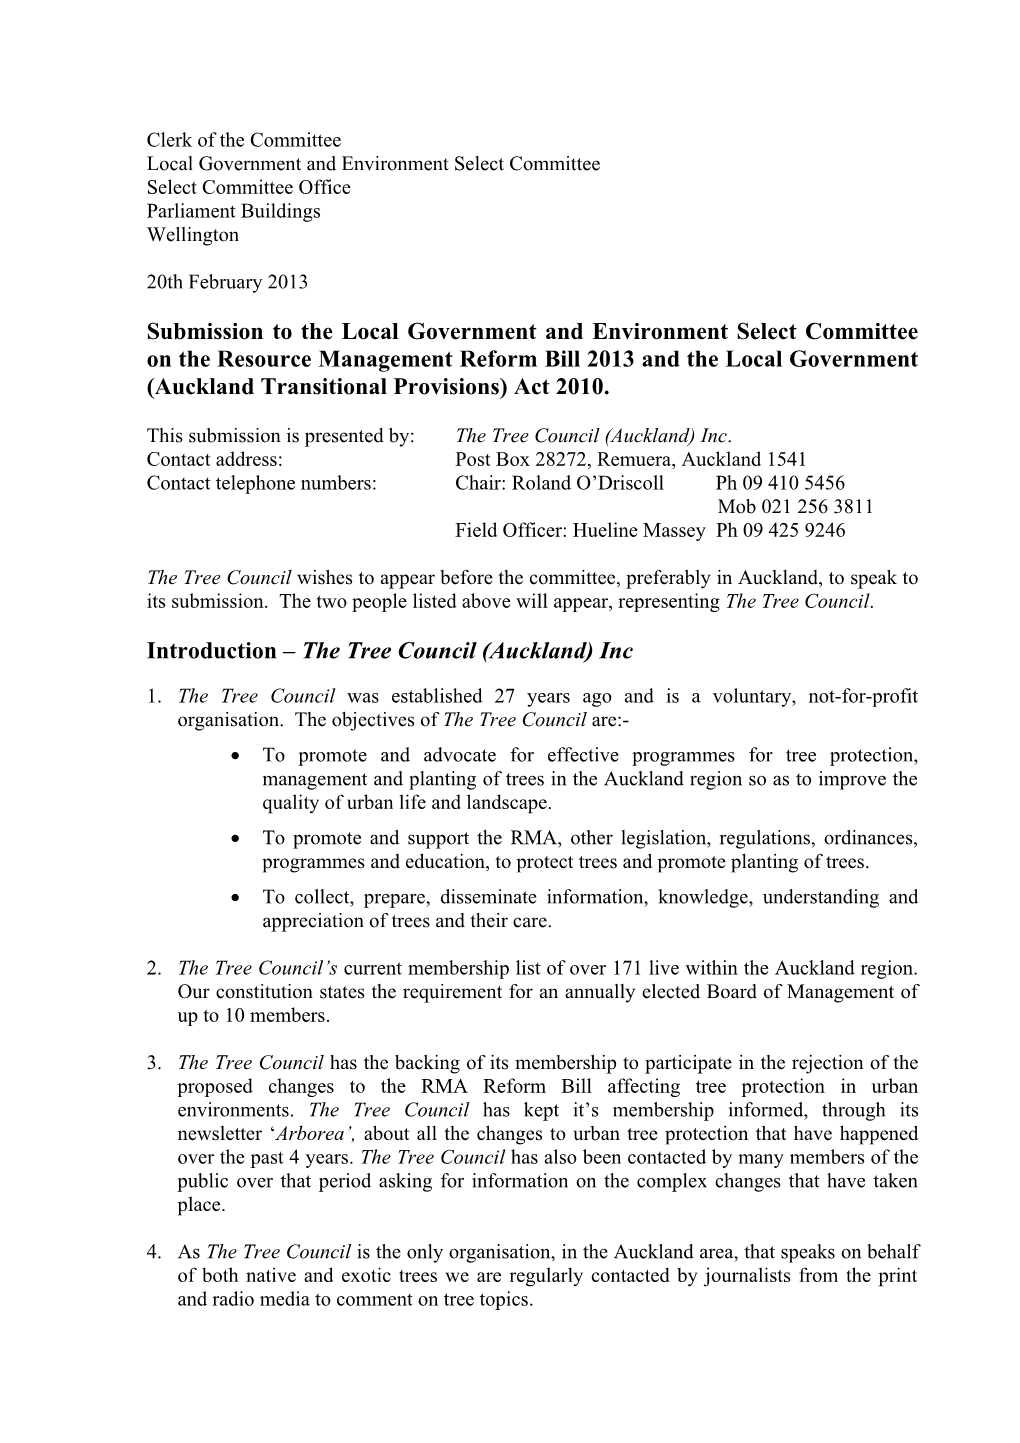 Submission to the Local Government and Environment Select Committee on the Resource Management